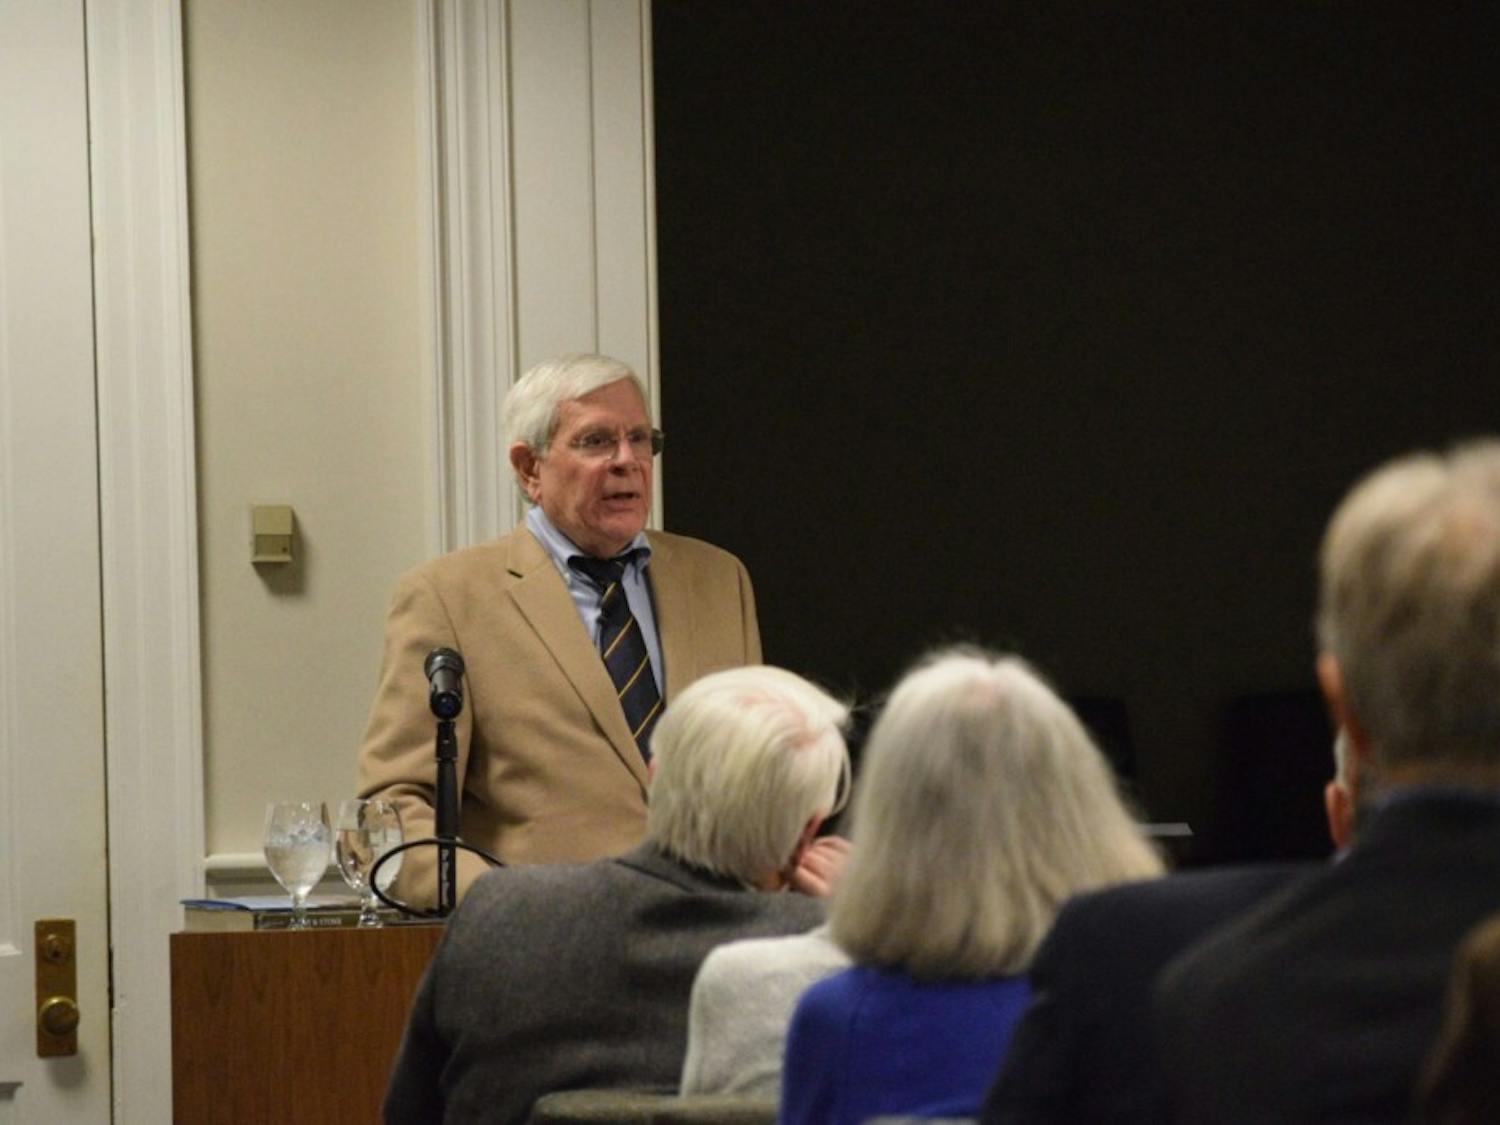 Howard E. Covington Jr. speaks on past presidents at UNC, based off his book: "Fire and Stone: The Making of the University of North Carolina Under Presidents Edward Kidder Graham and Harry Woodburn Chase", at Wilson Library on Tuesday, Feb. 19, 2019.